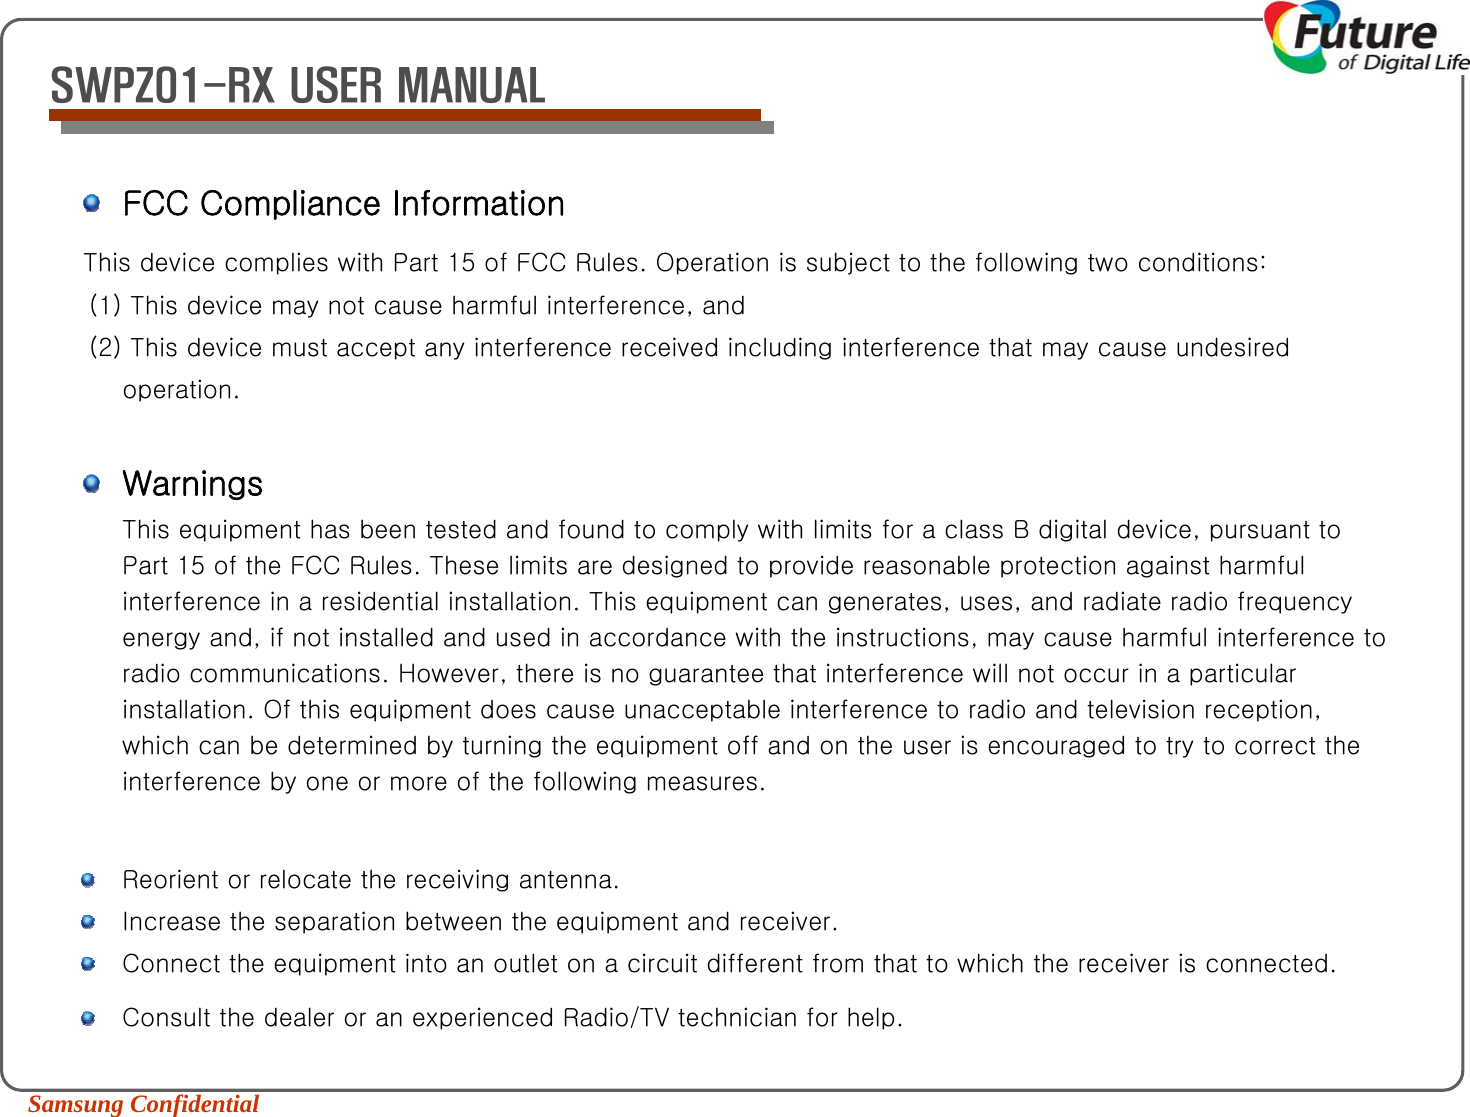 Samsung Confidential SWPZ01-RX USER MANUALFCC Compliance InformationThis device complies with Part 15 of FCC Rules. Operation is subject to the following two conditions: (1) This device may not cause harmful interference, and (2) This device must accept any interference received including interference that may cause undesired operation. WarningsThis equipment has been tested and found to comply with limits for a class B digital device, pursuant to Part 15 of the FCC Rules. These limits are designed to provide reasonable protection against harmful interference in a residential installation. This equipment can generates, uses, and radiate radio frequency energy and, if not installed and used in accordance with the instructions, may cause harmful interference to radio communications. However, there is no guarantee that interference will not occur in a particular installation. Of this equipment does cause unacceptable interference to radio and television reception, which can be determined by turning the equipment off and on the user is encouraged to try to correct the interference by one or more of the following measures. Reorient or relocate the receiving antenna.  Increase the separation between the equipment and receiver.  Connect the equipment into an outlet on a circuit different from that to which the receiver is connected.Consult the dealer or an experienced Radio/TV technician for help.